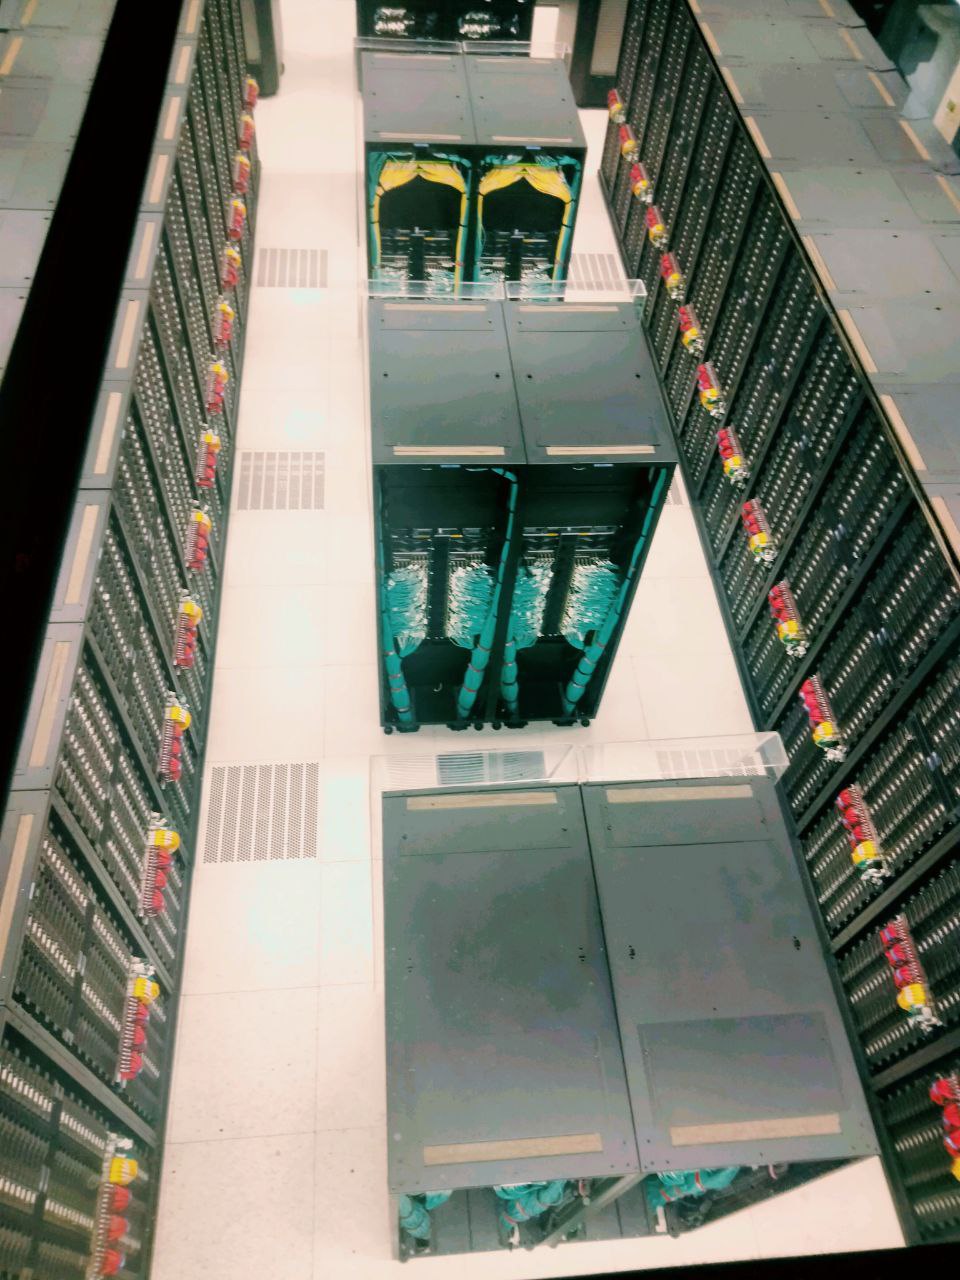 The indoors of a data centre